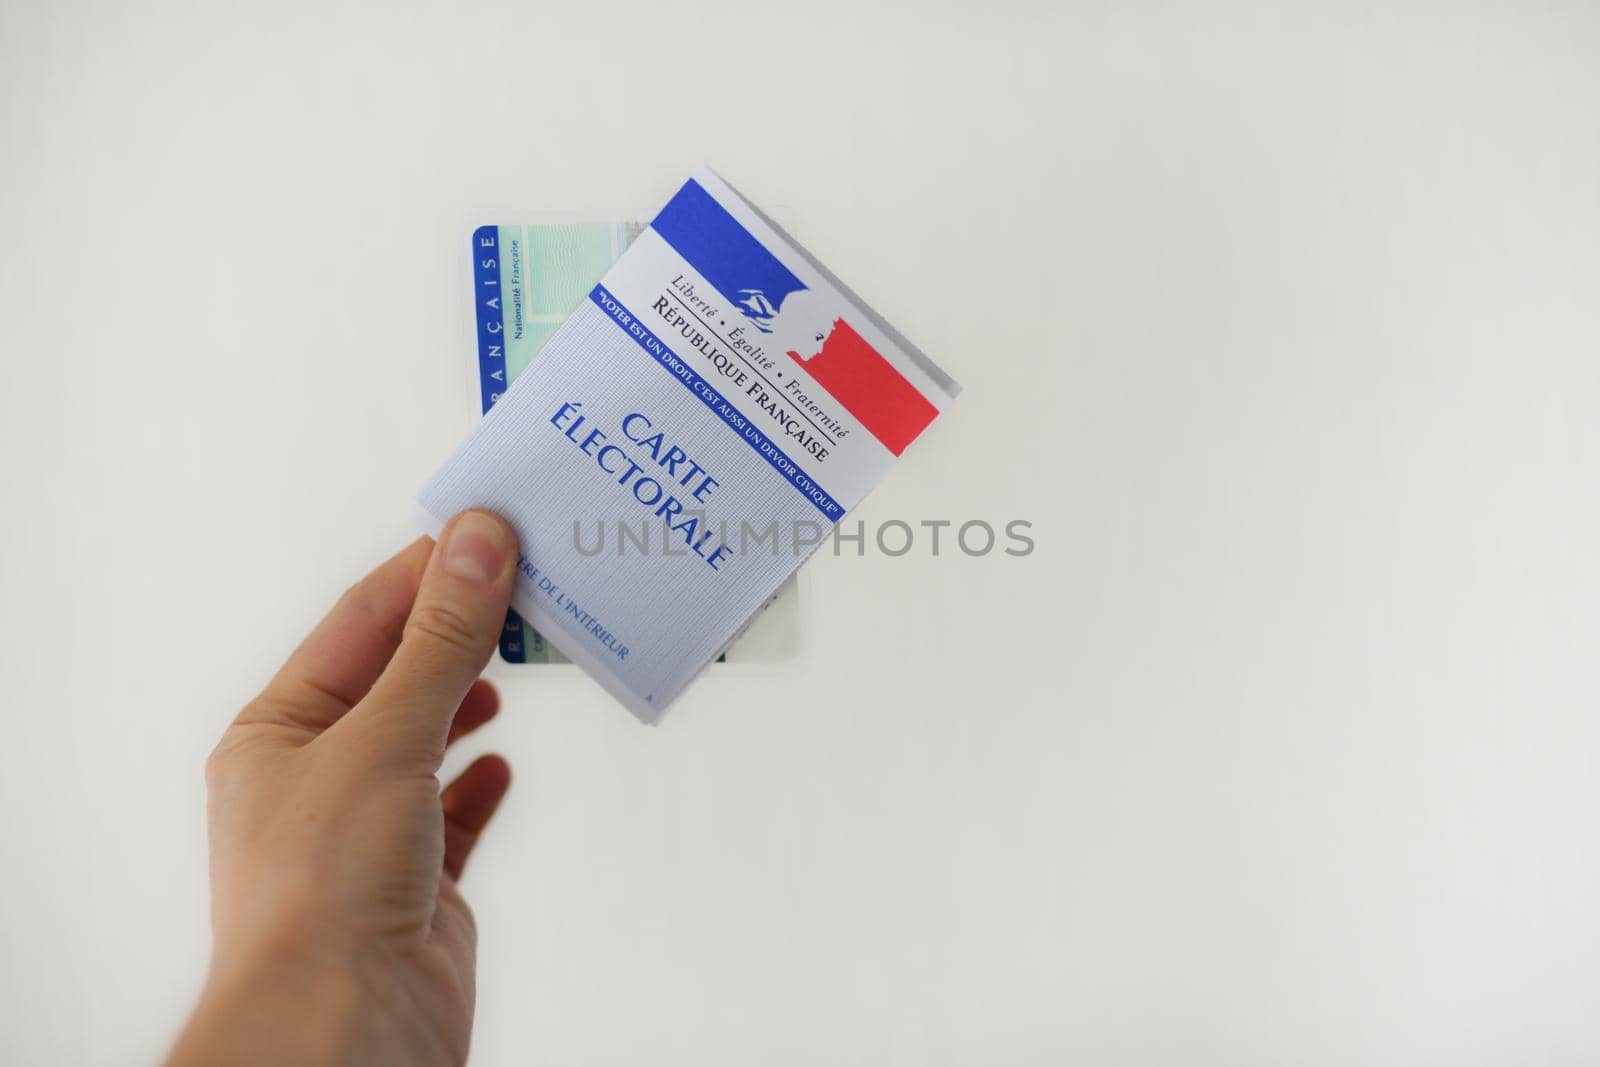 PARIS, FRANCE - MARCH 09, 2020: A Hand holds a french electoral card and an identification card for voting